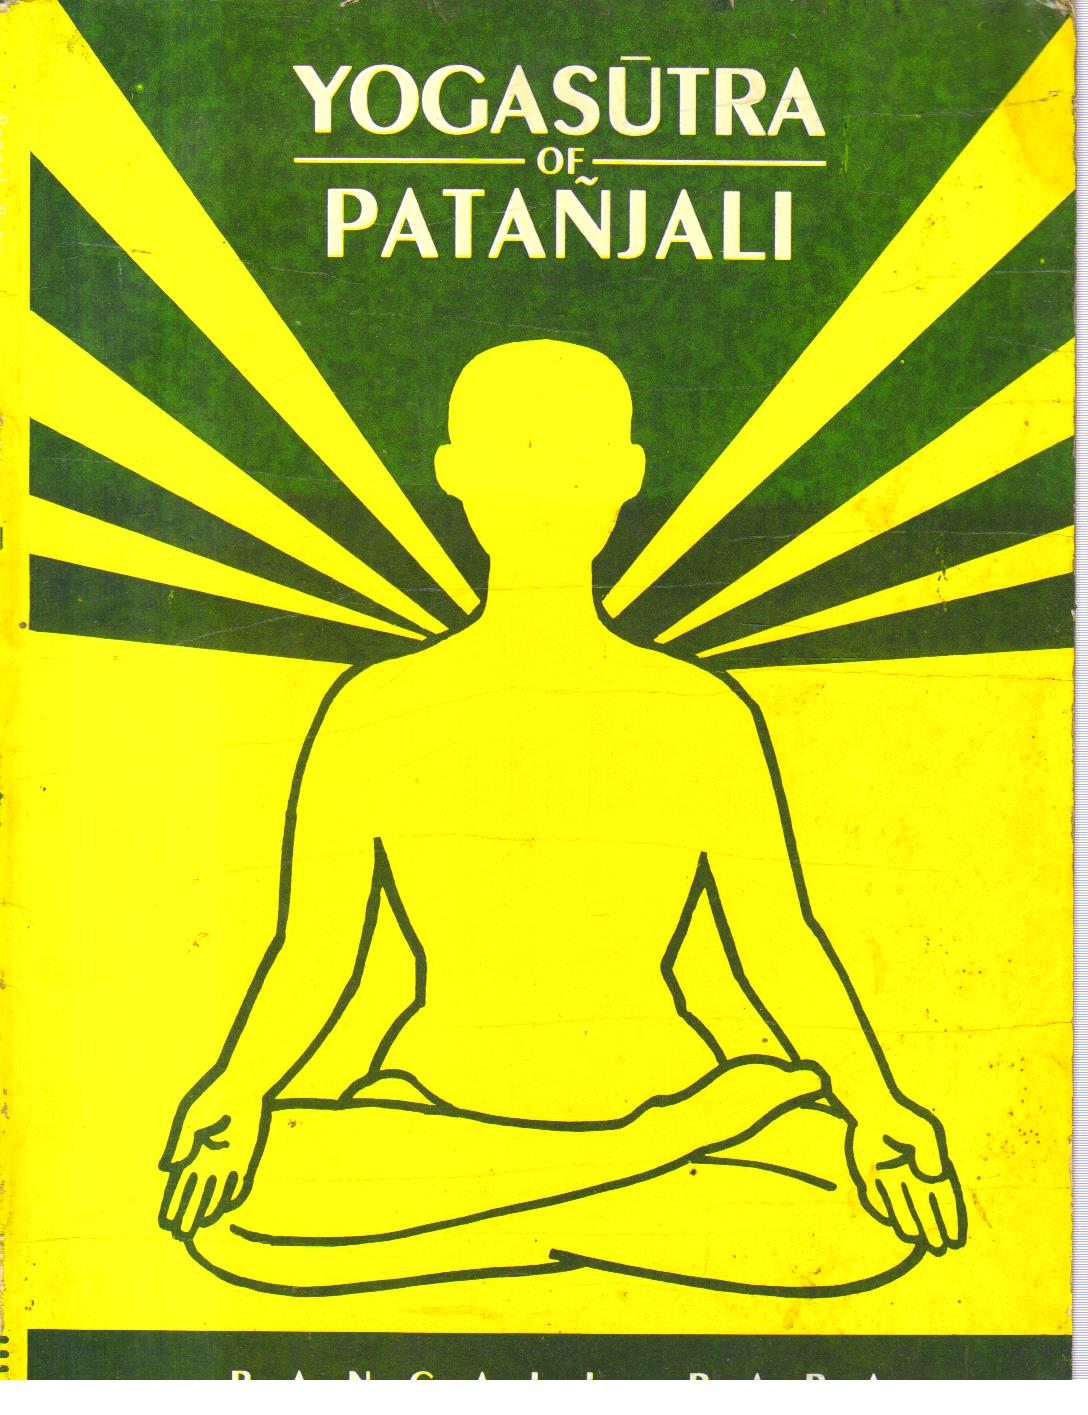 Yoga Sutra of Patanjali.